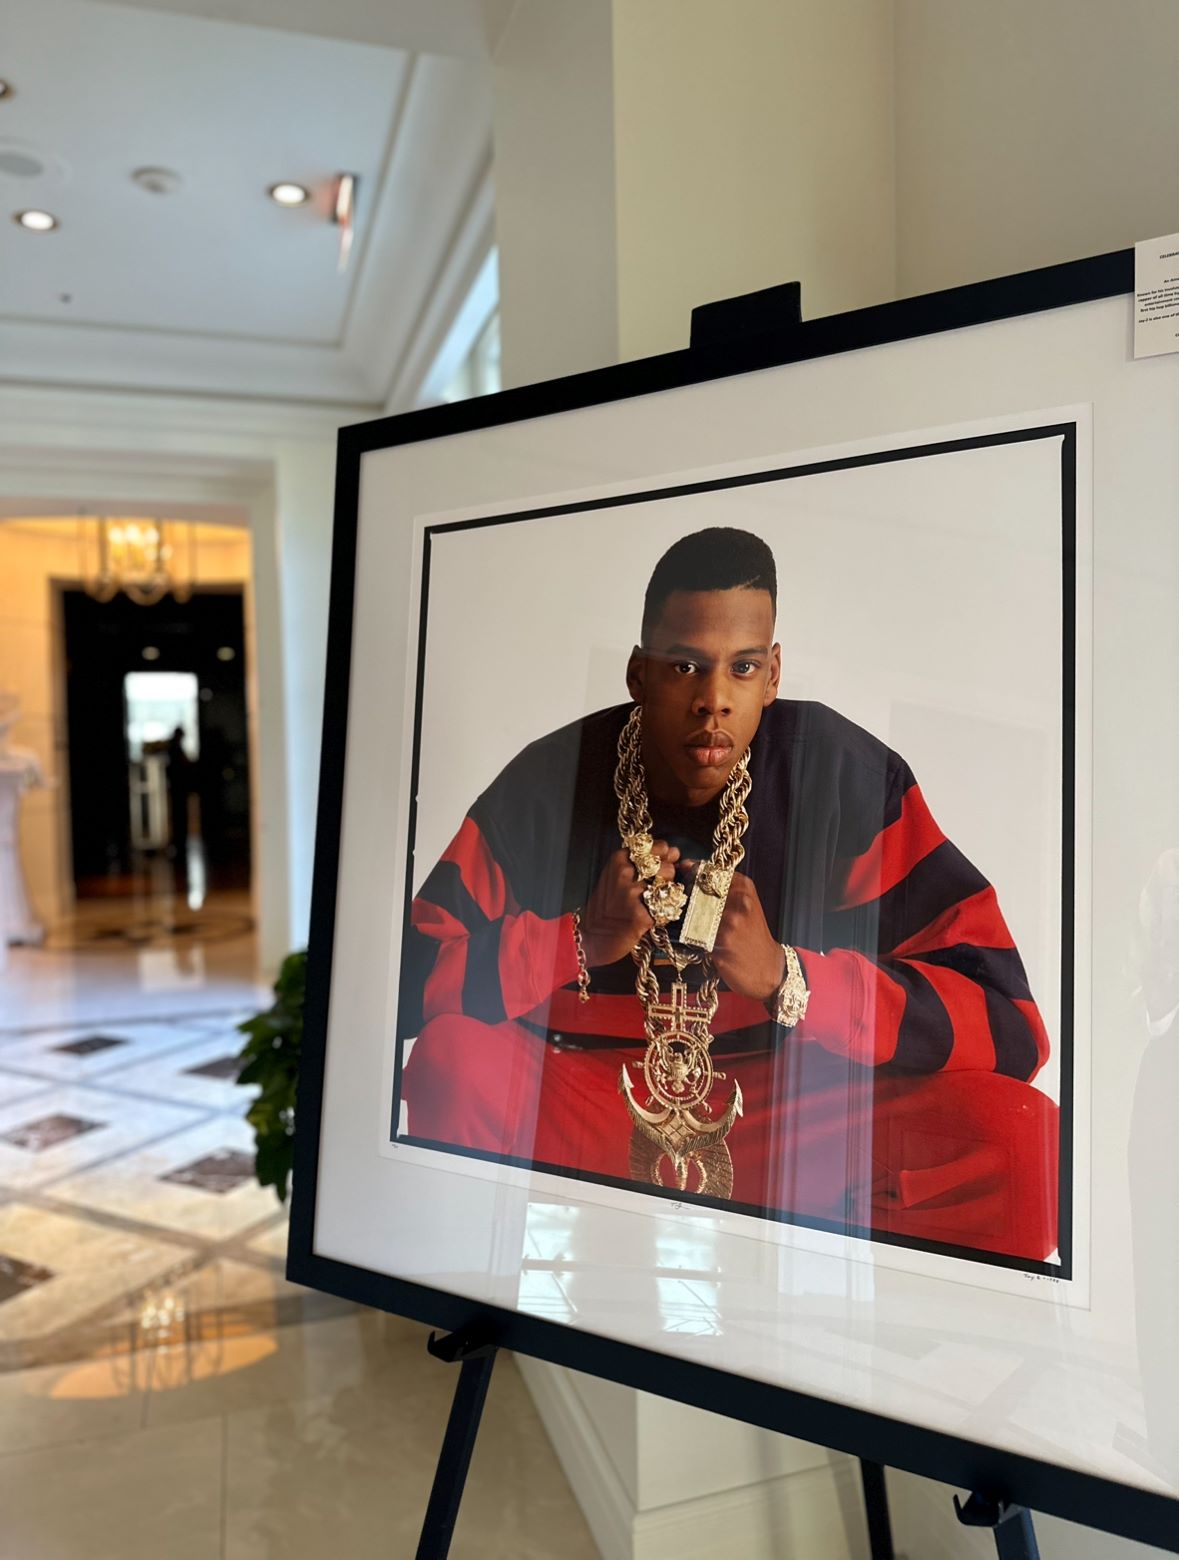 An image of a photograph of Jay-Z.